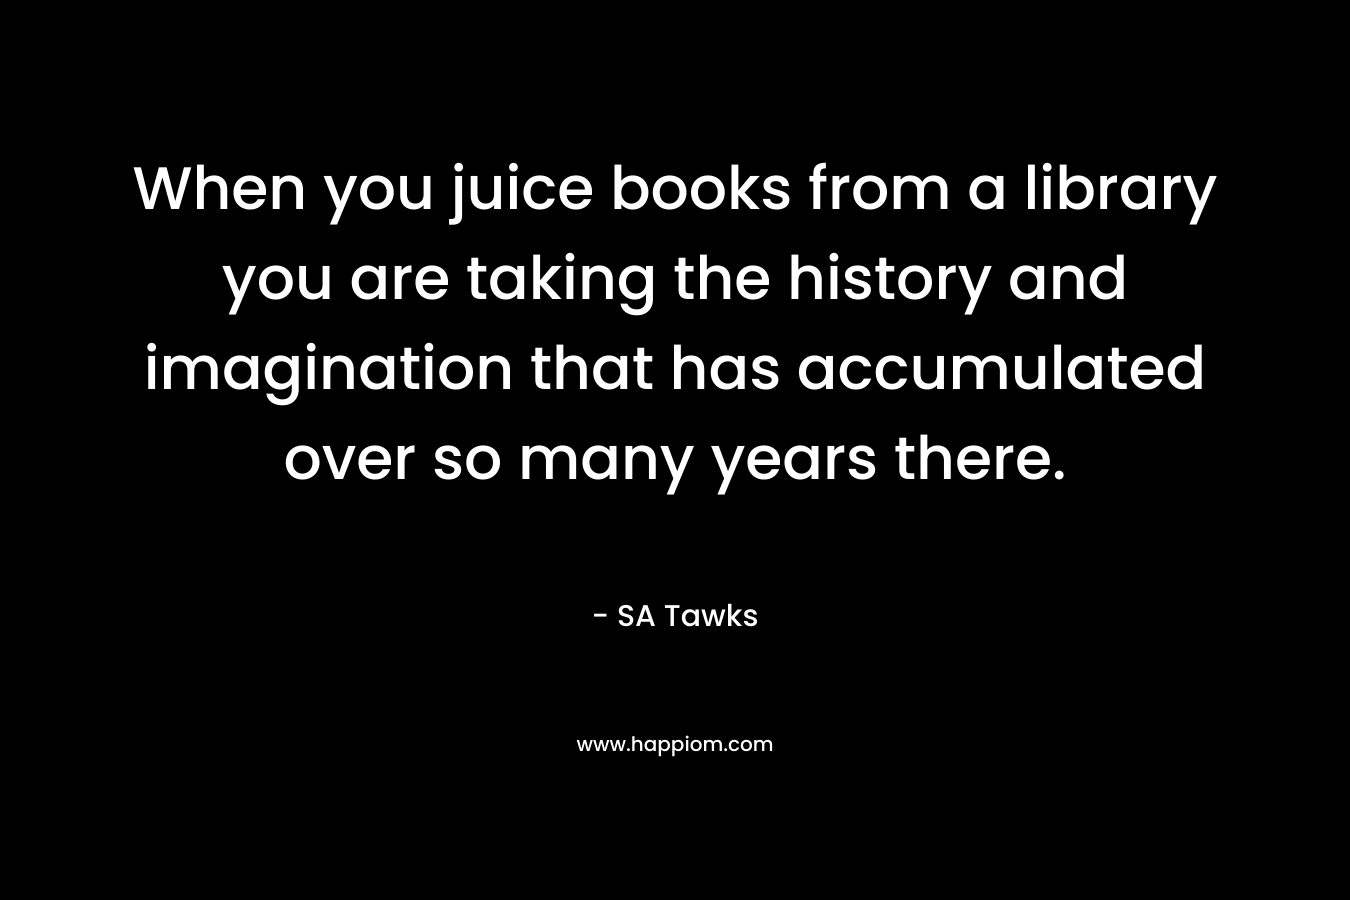 When you juice books from a library you are taking the history and imagination that has accumulated over so many years there.